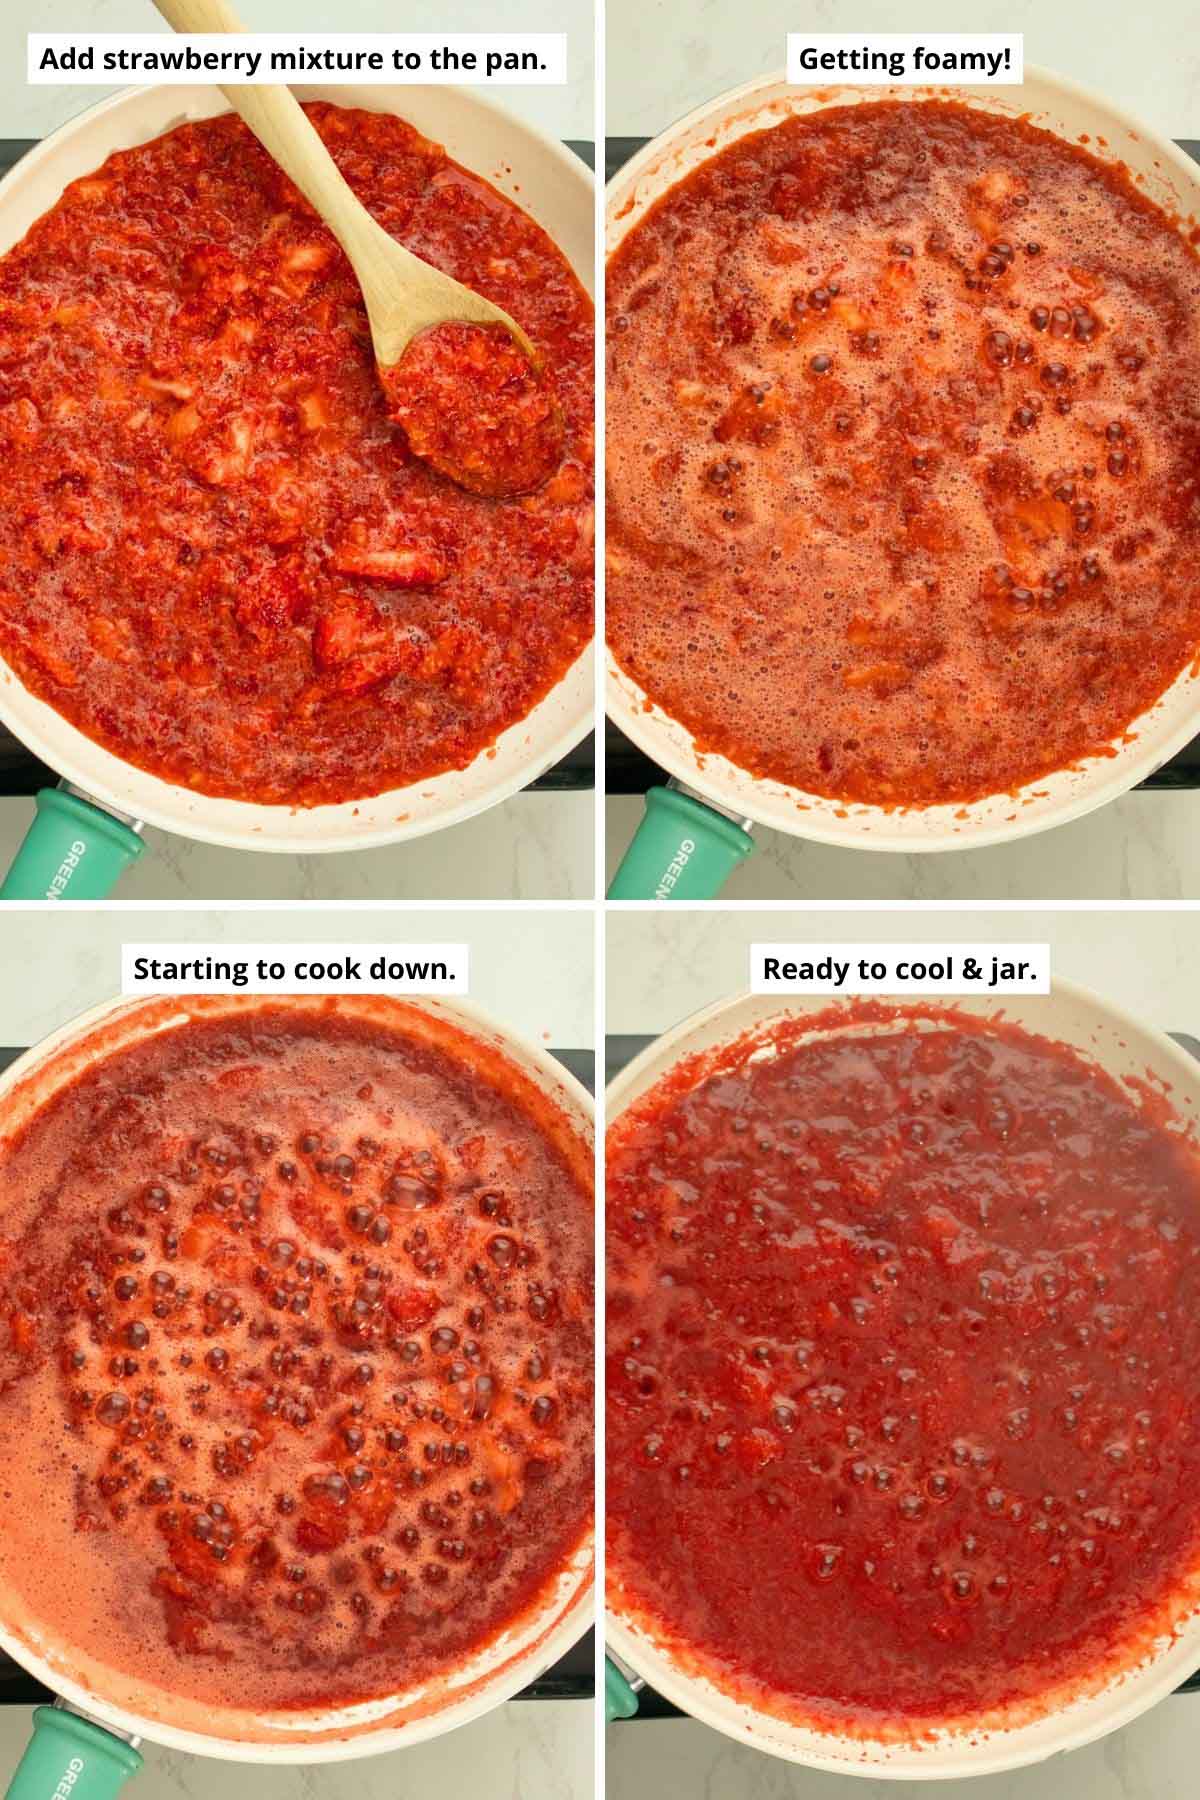 image collage showing the strawberry mixture in the pan at different stages of cooking